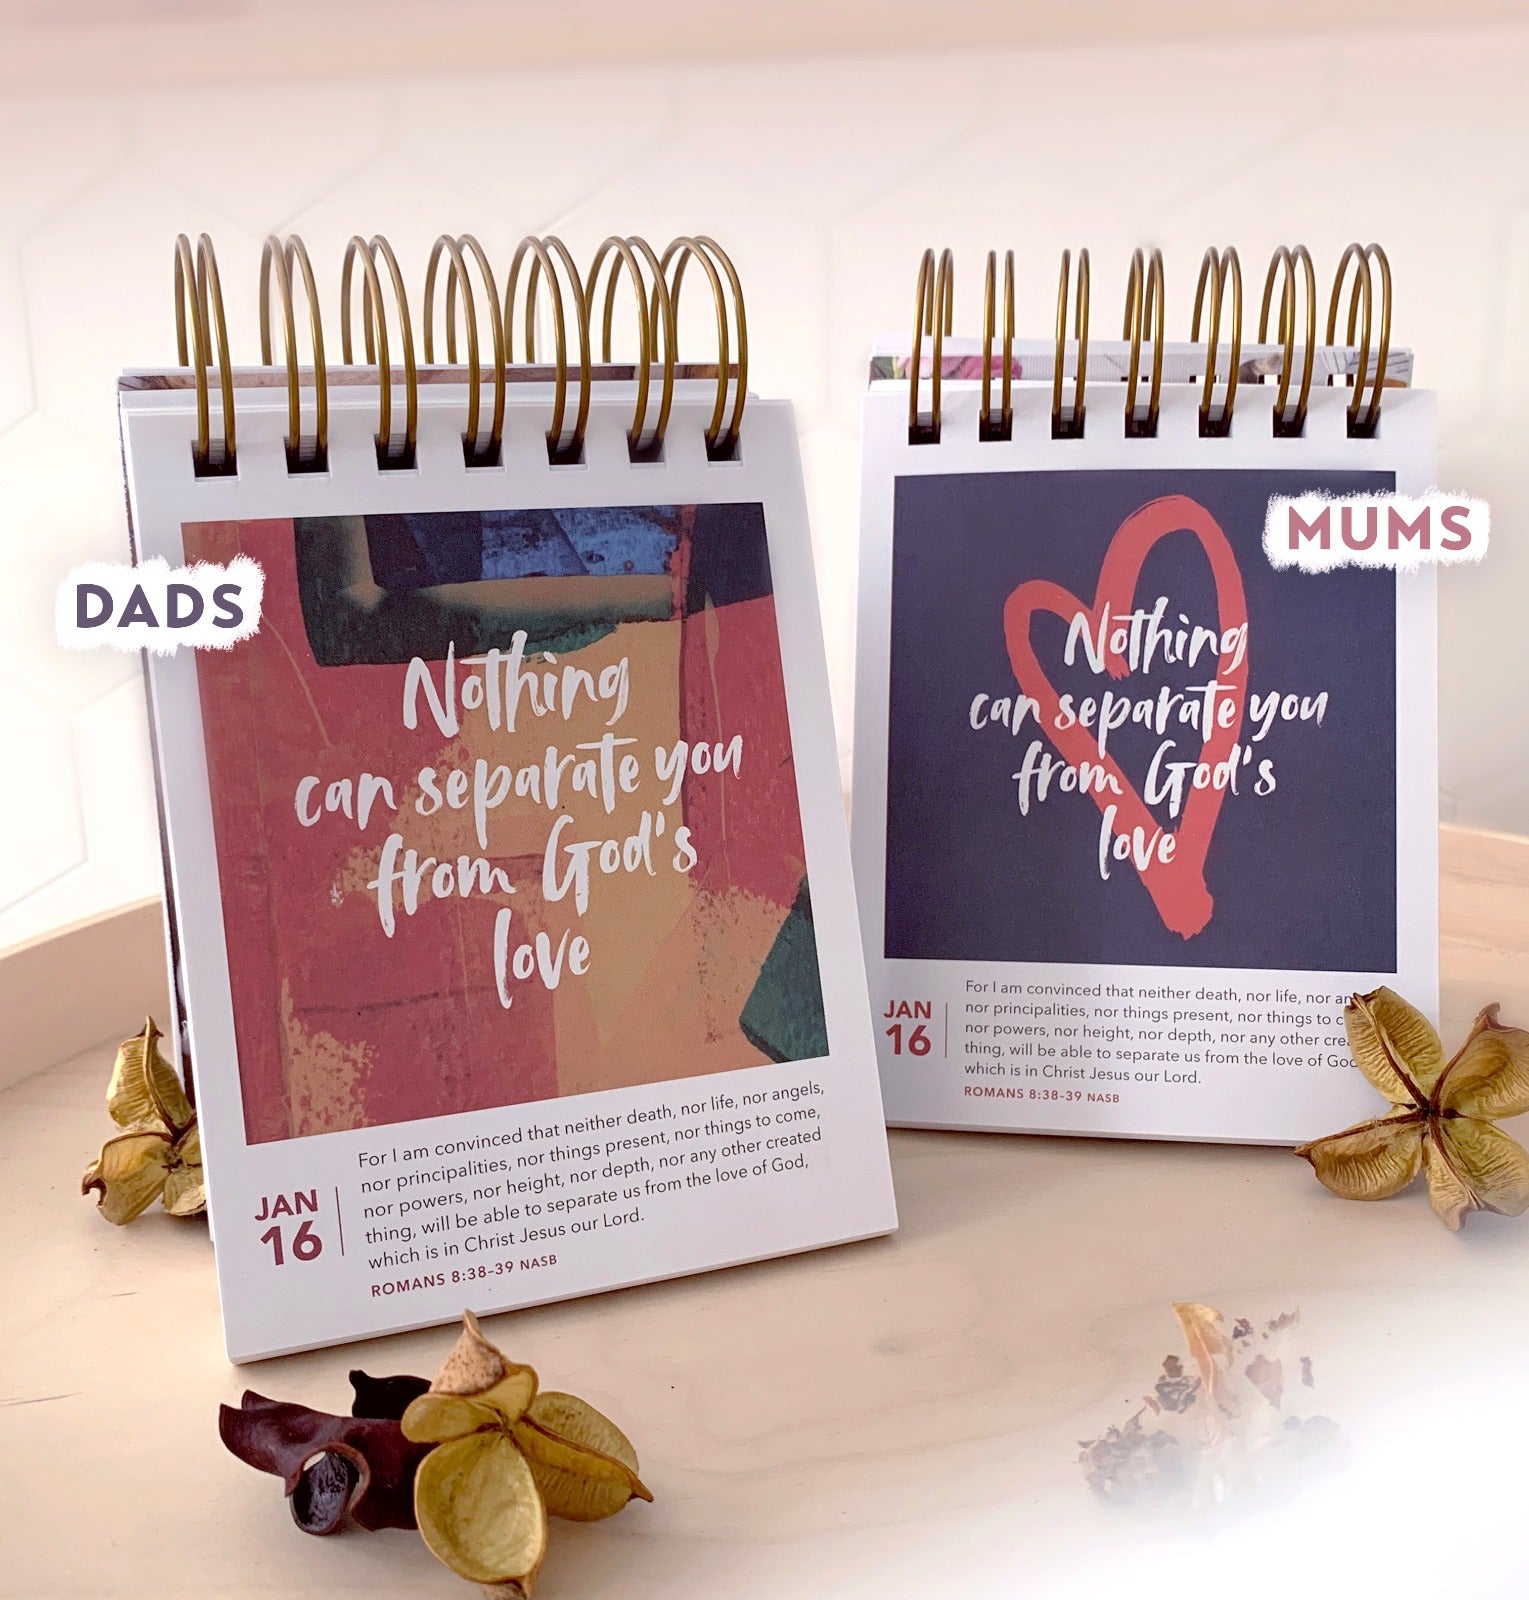 Wake Up To Grace For Moms —366-Day Inspirational Perpetual Calendar